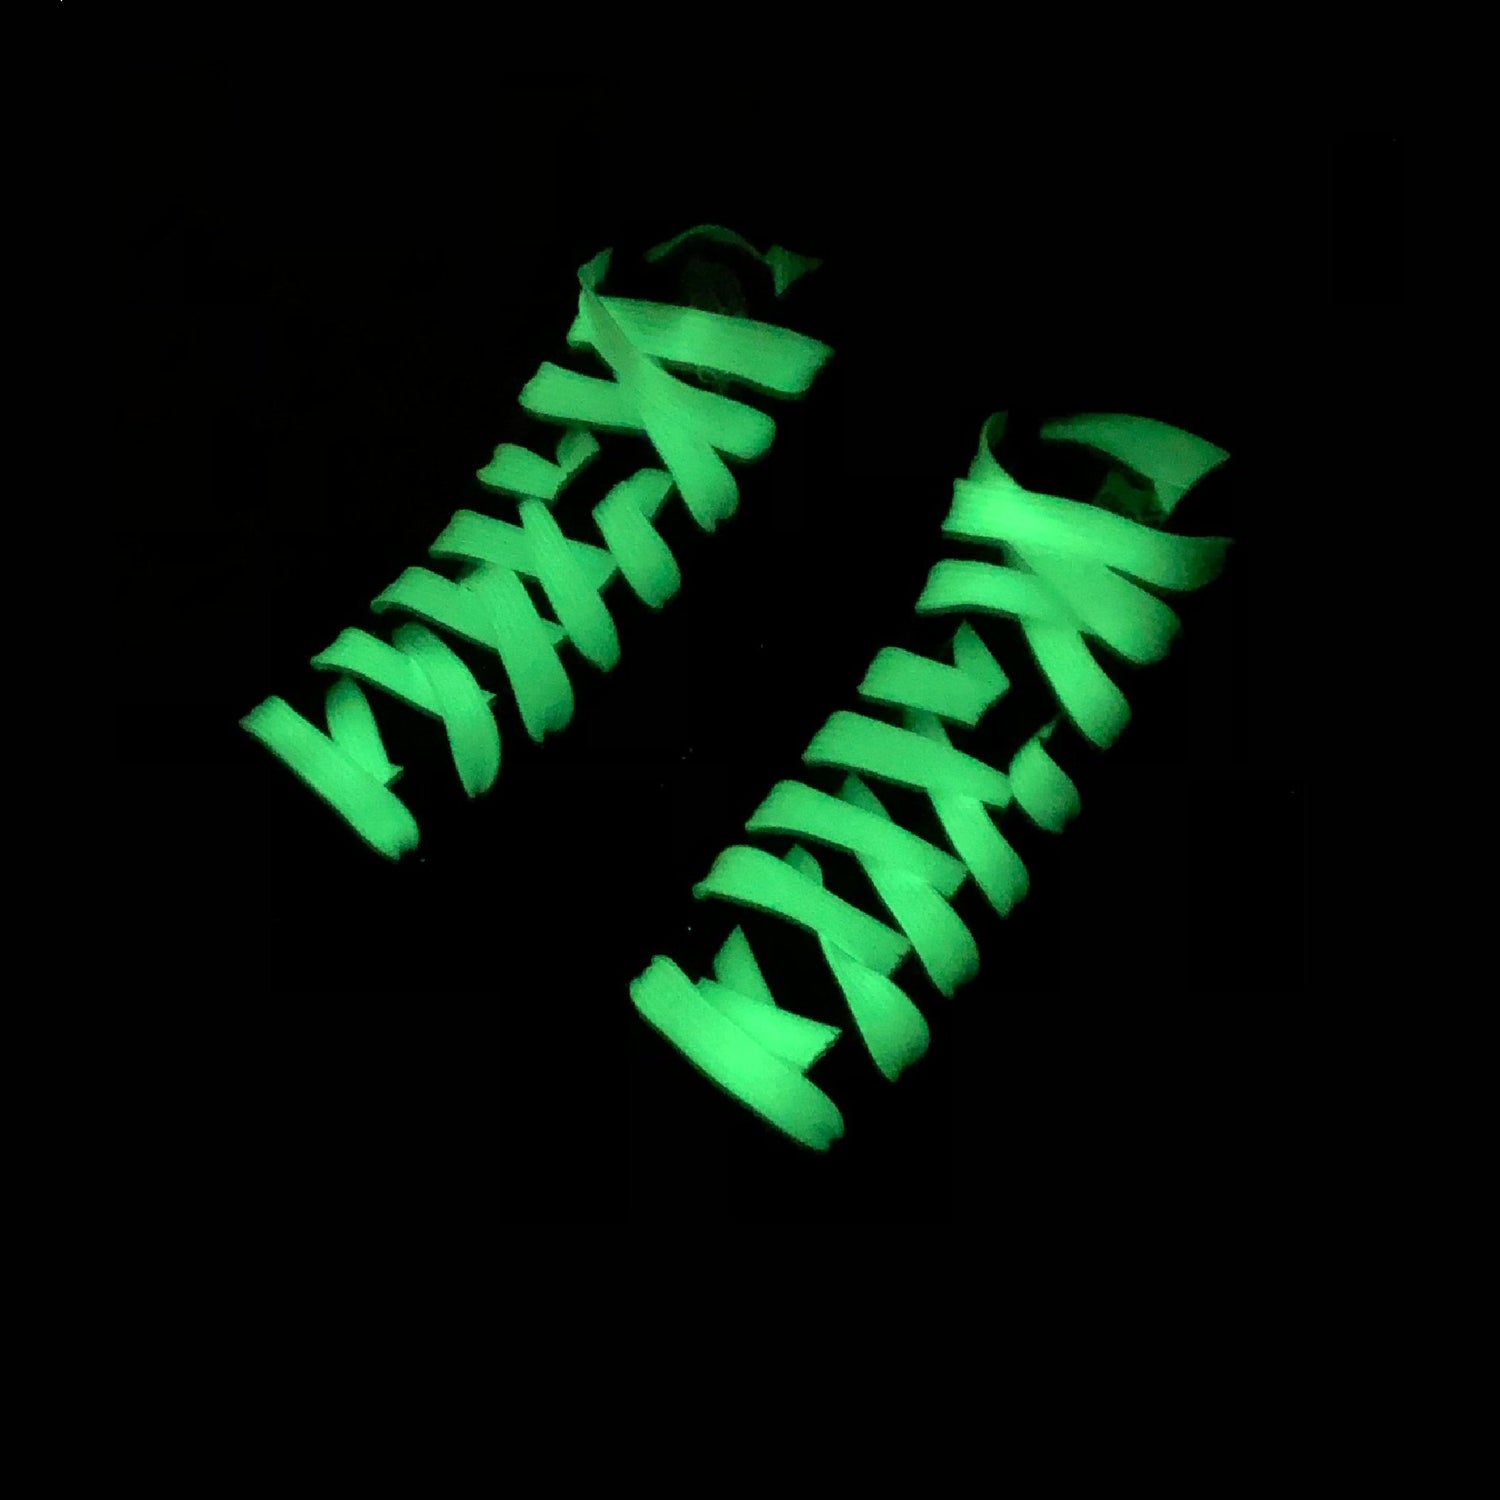 Glow in the Dark Laces